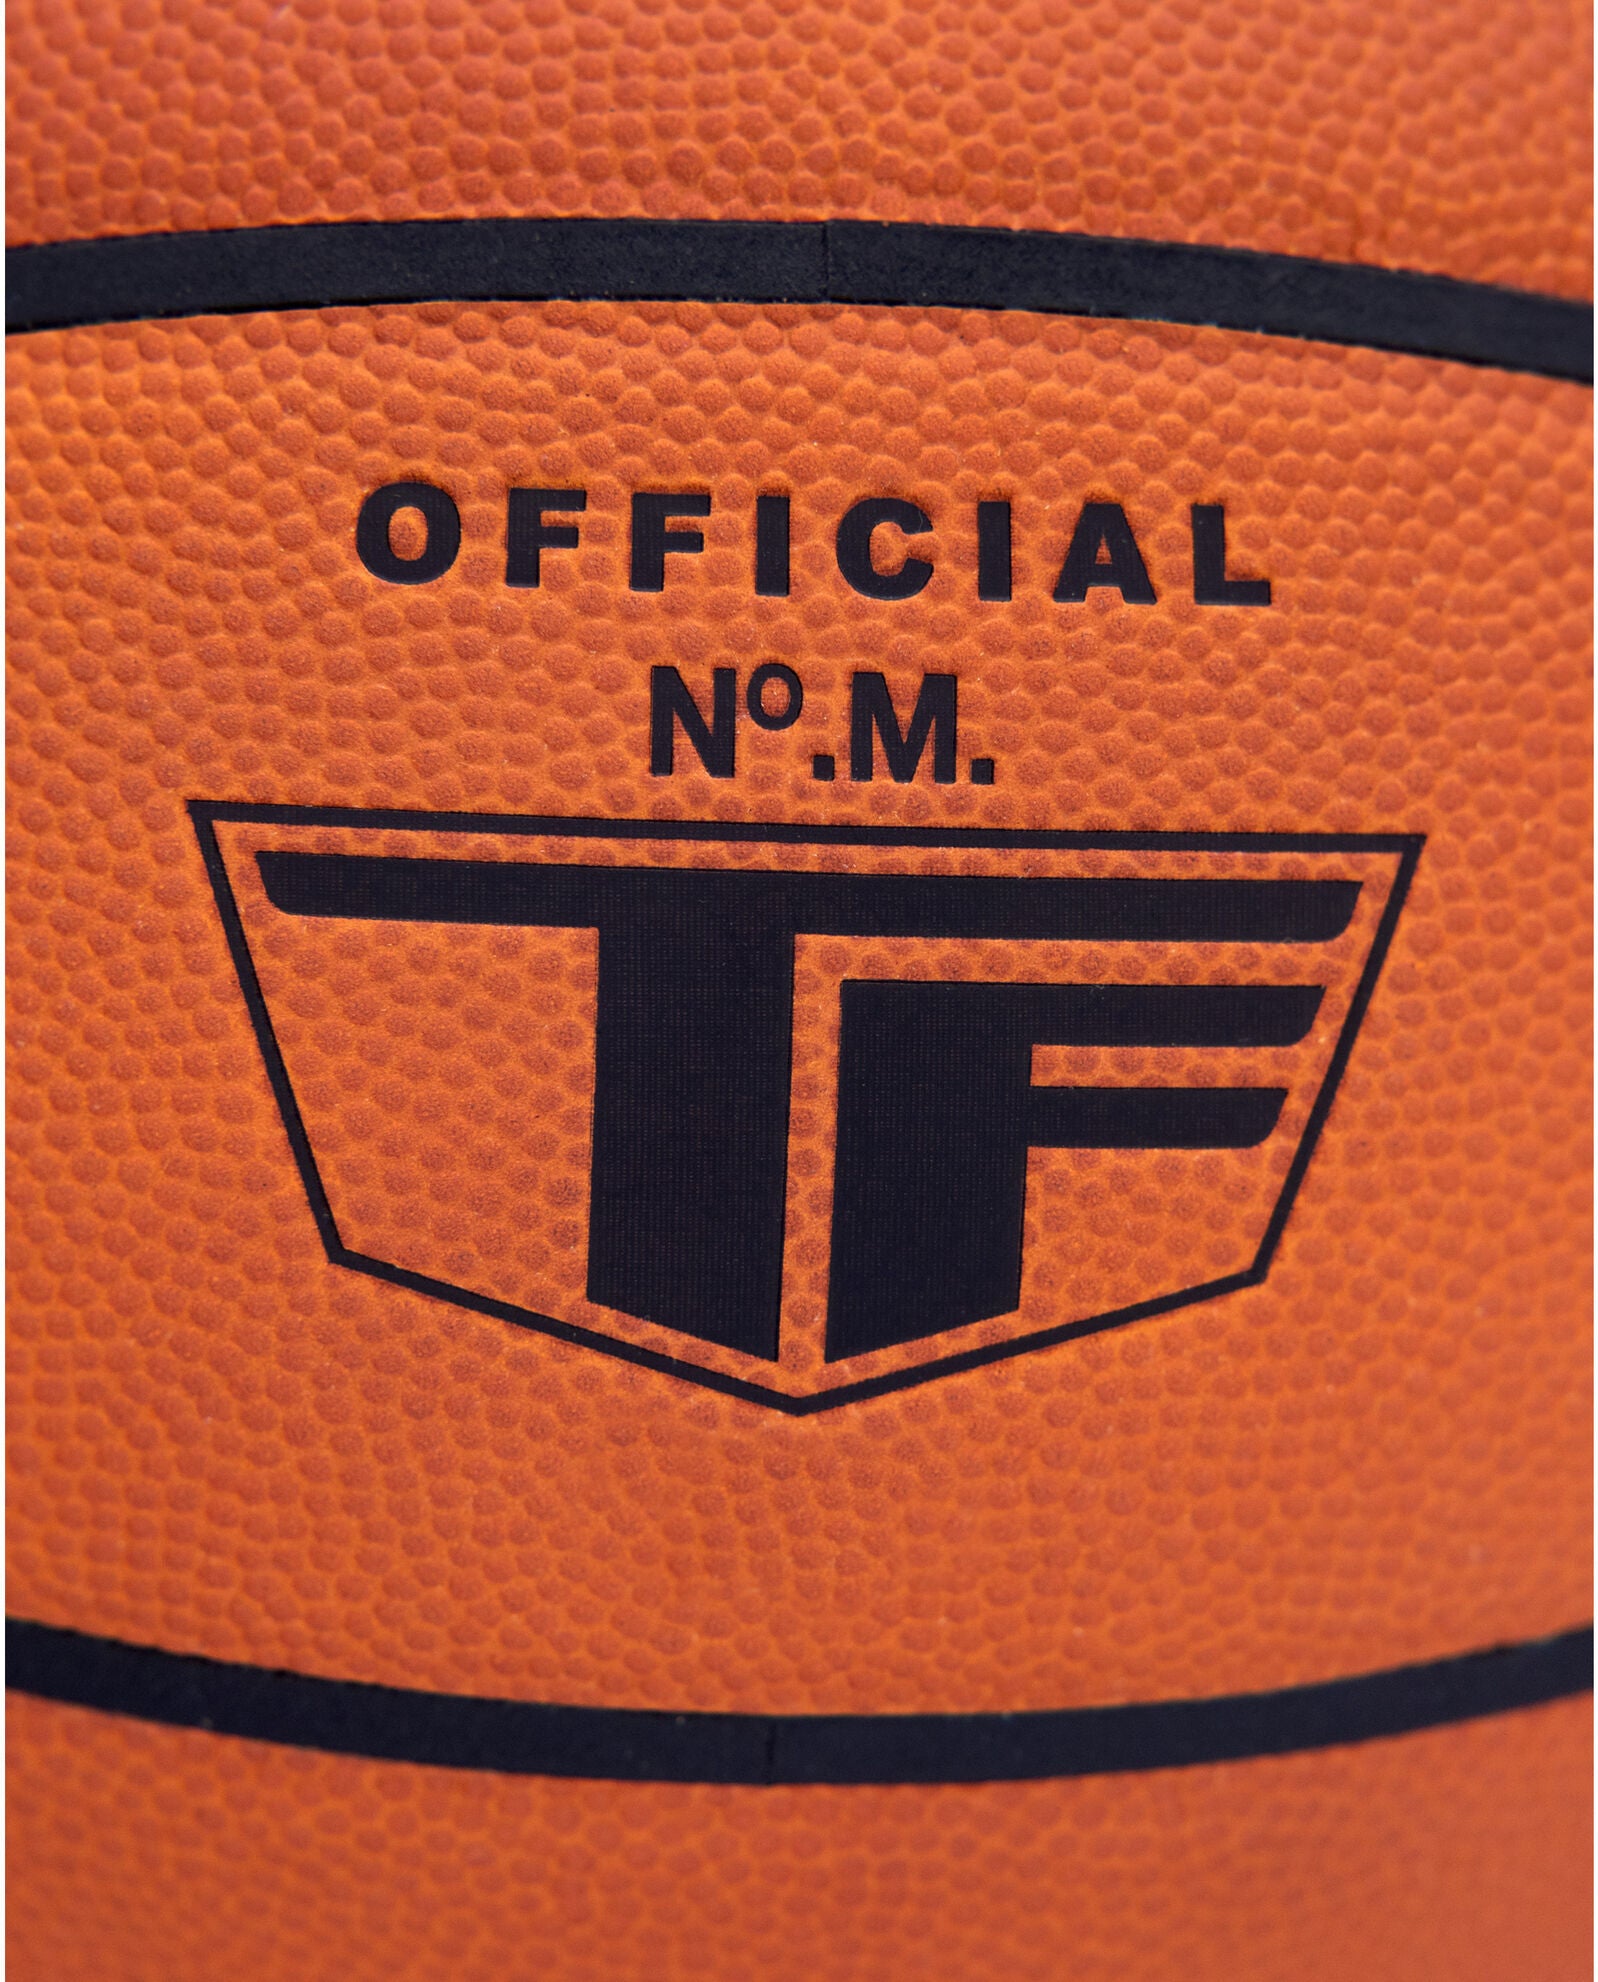 Spalding TF Model M Official Leather Indoor Game Basketball